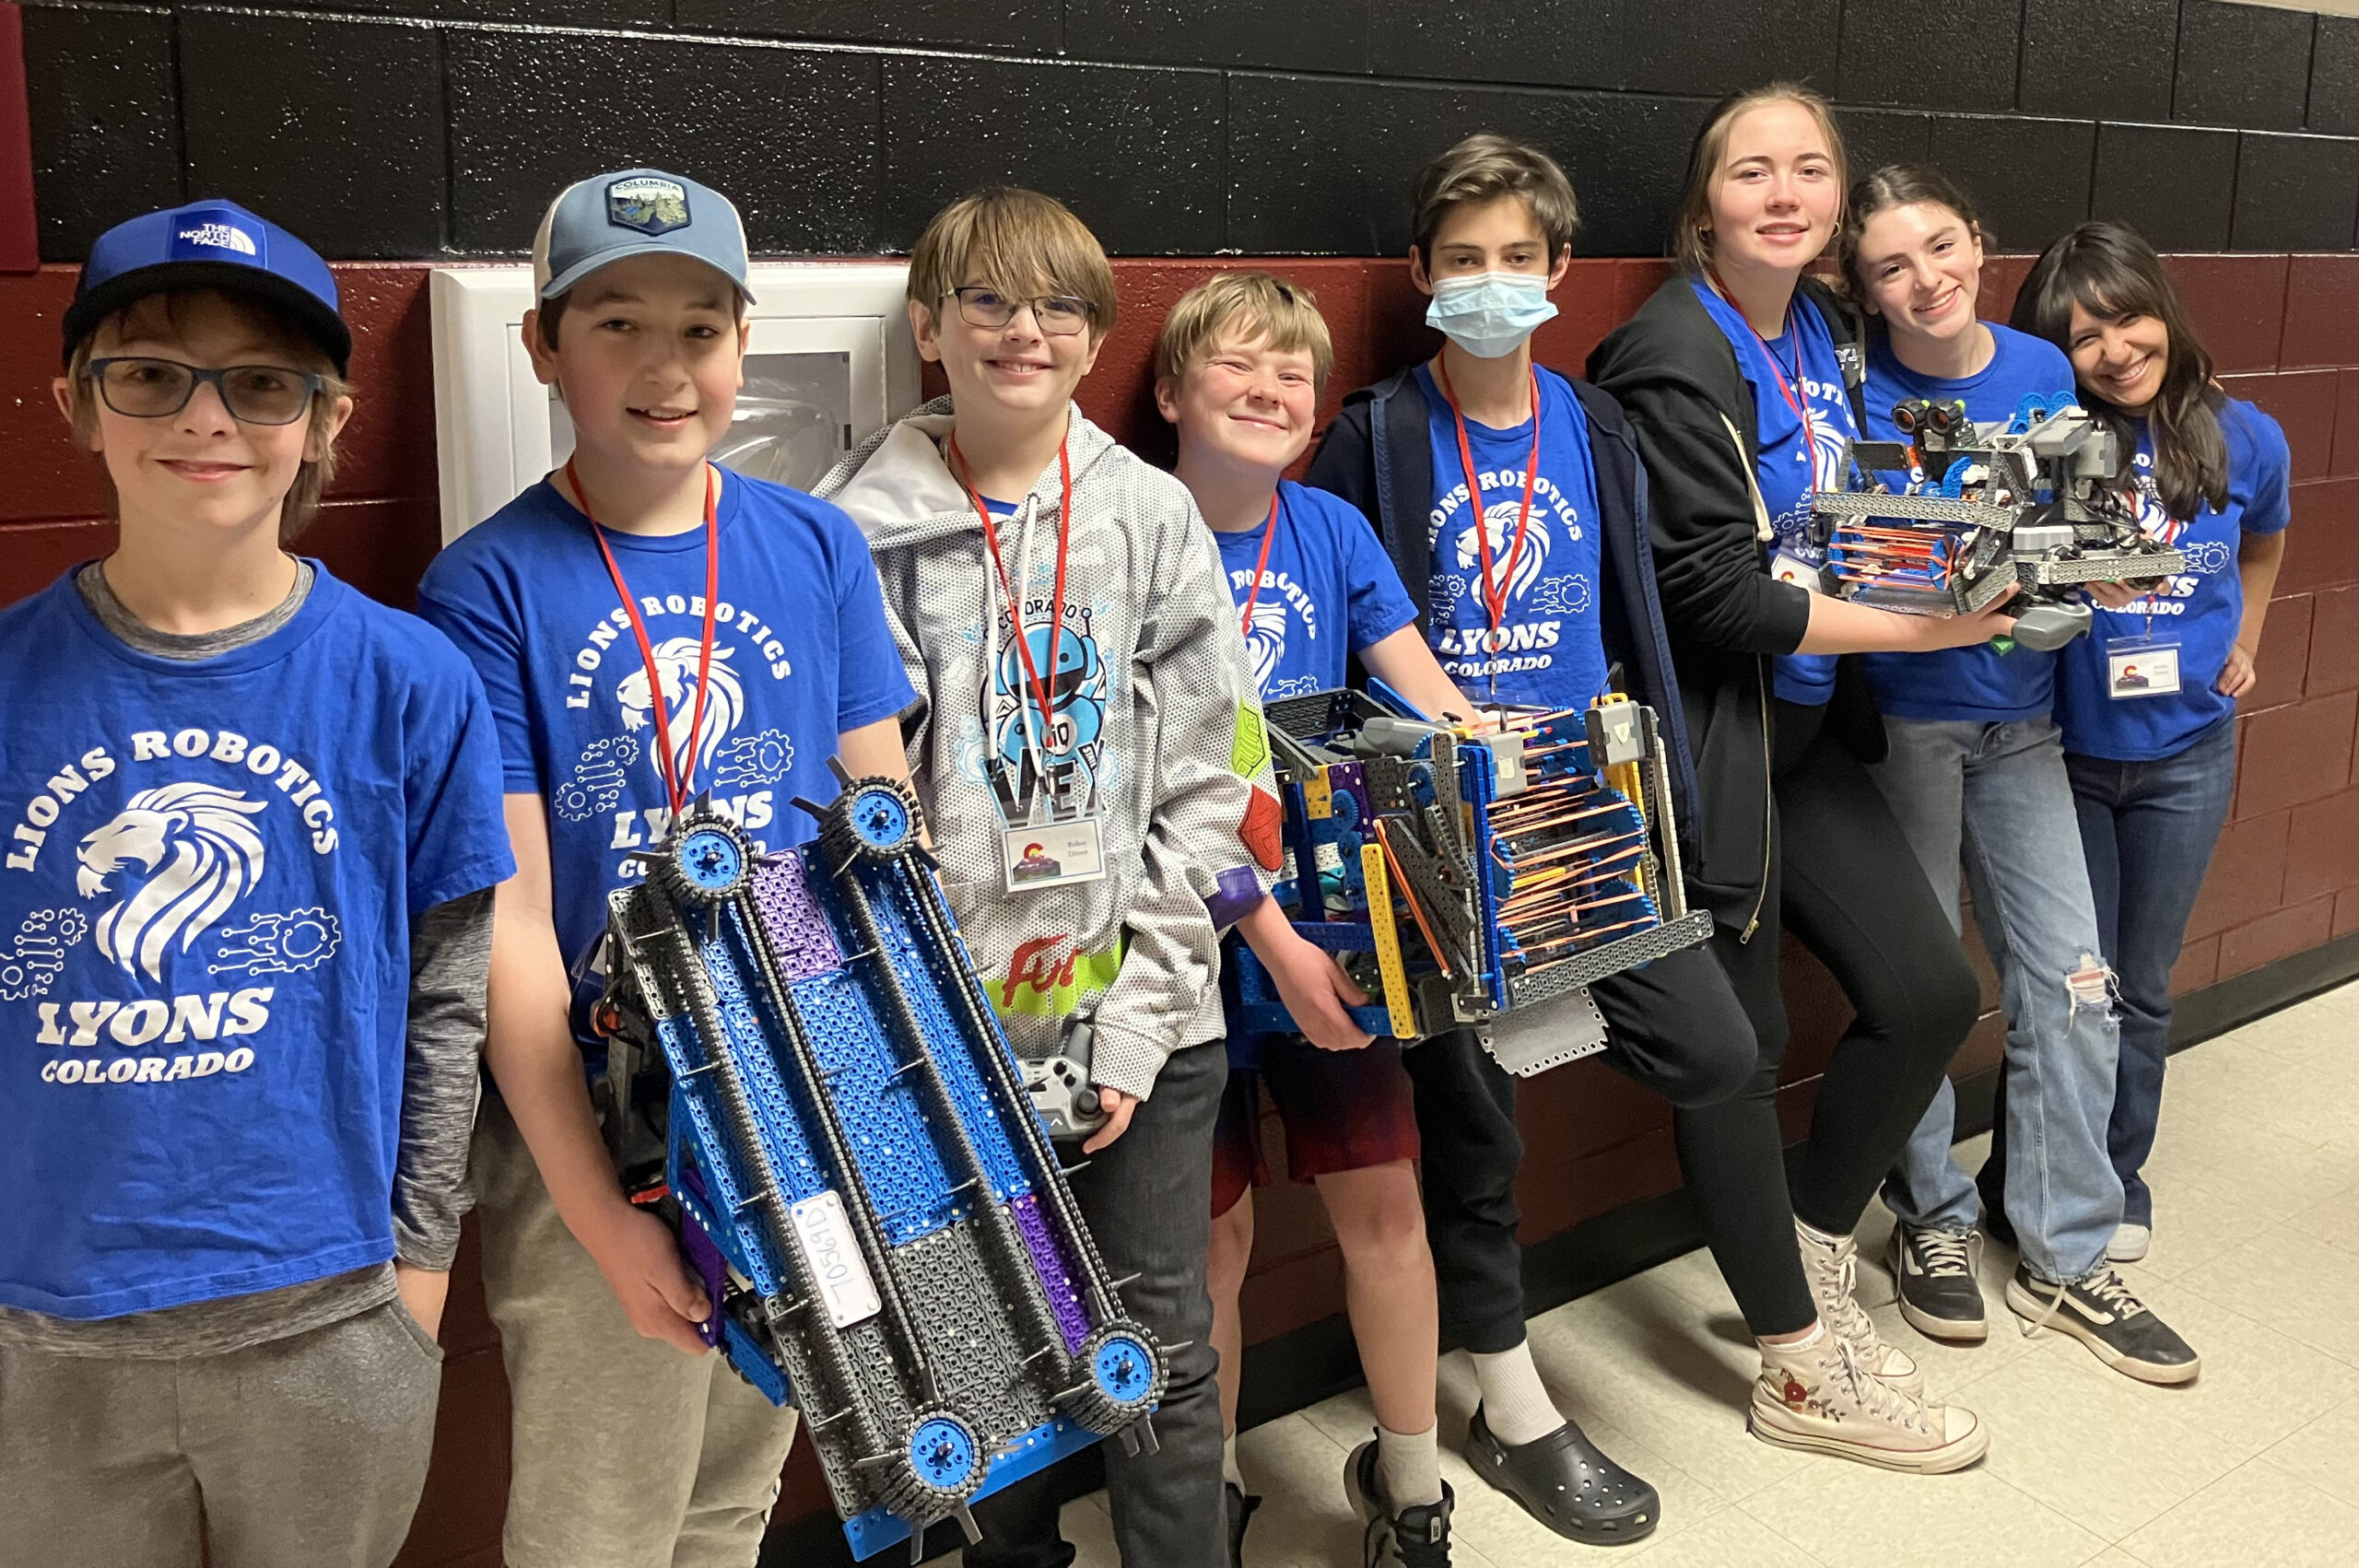 Standing in a line are five middle school boys on the left and three middle school girls on the right. They're holding robotics robots and trophies while smiling at the camera.